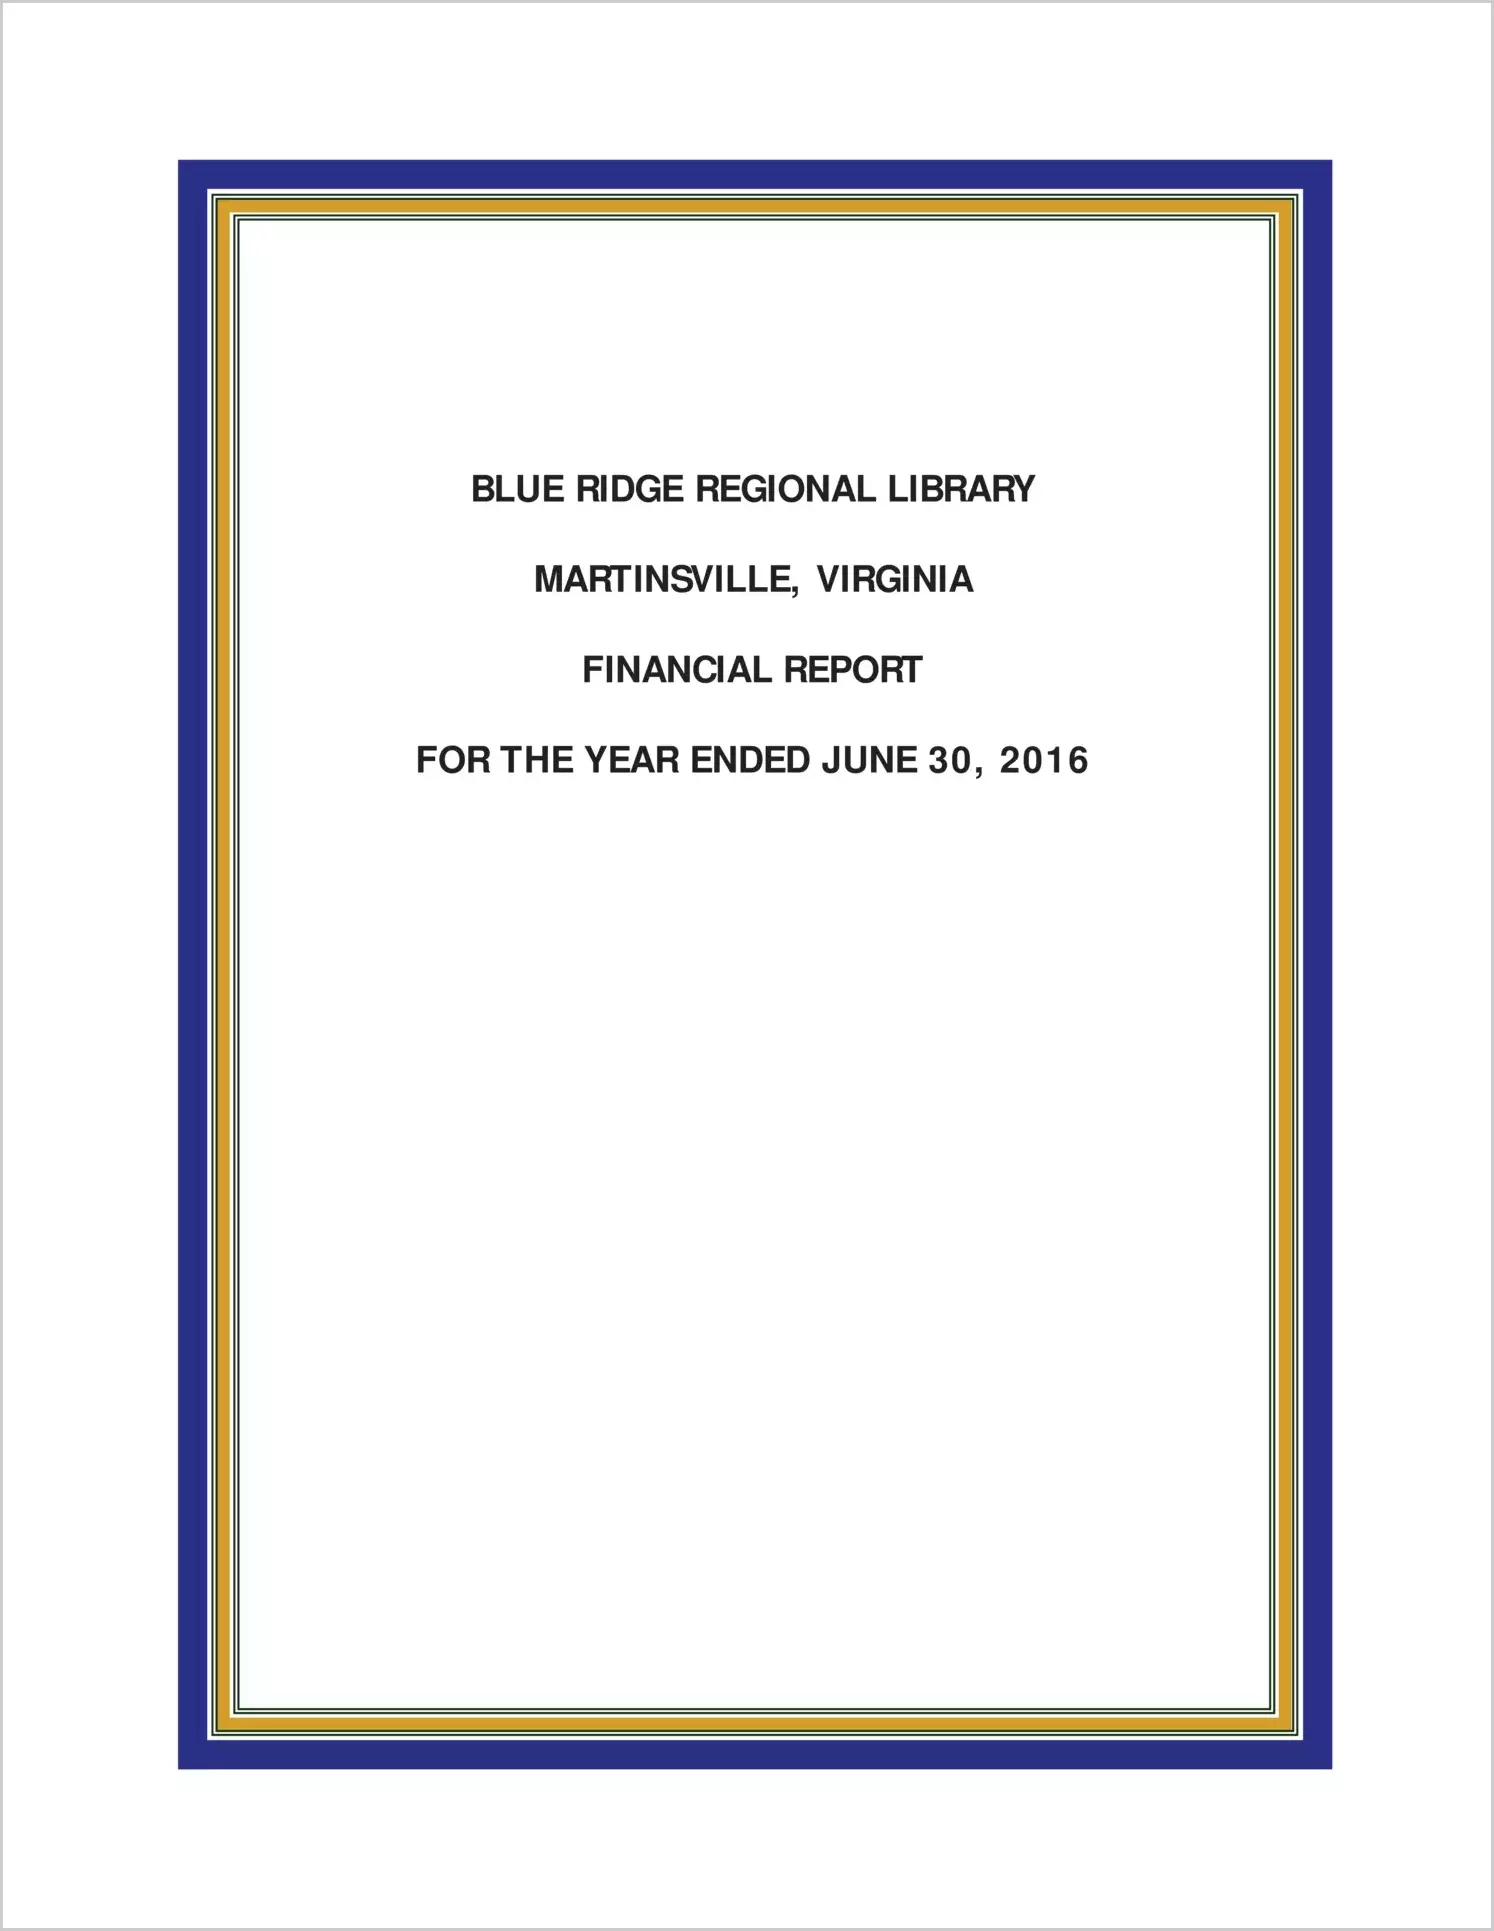 2016 ABC/Other Annual Financial Report  for Blue Ridge Regional Library